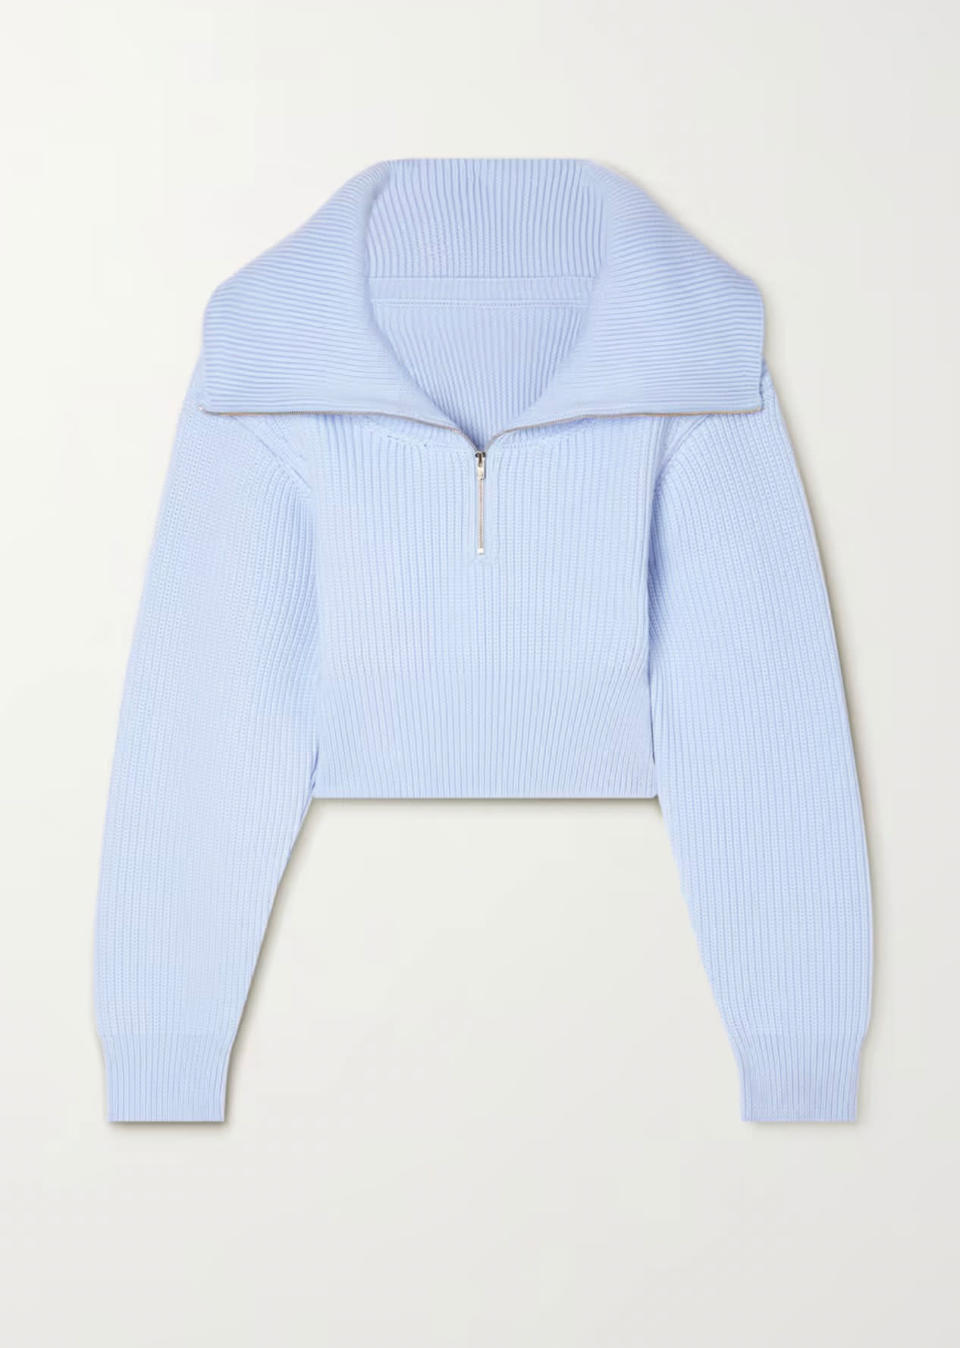 Jacquemus Risoul Cropped Half-Zip Sweater